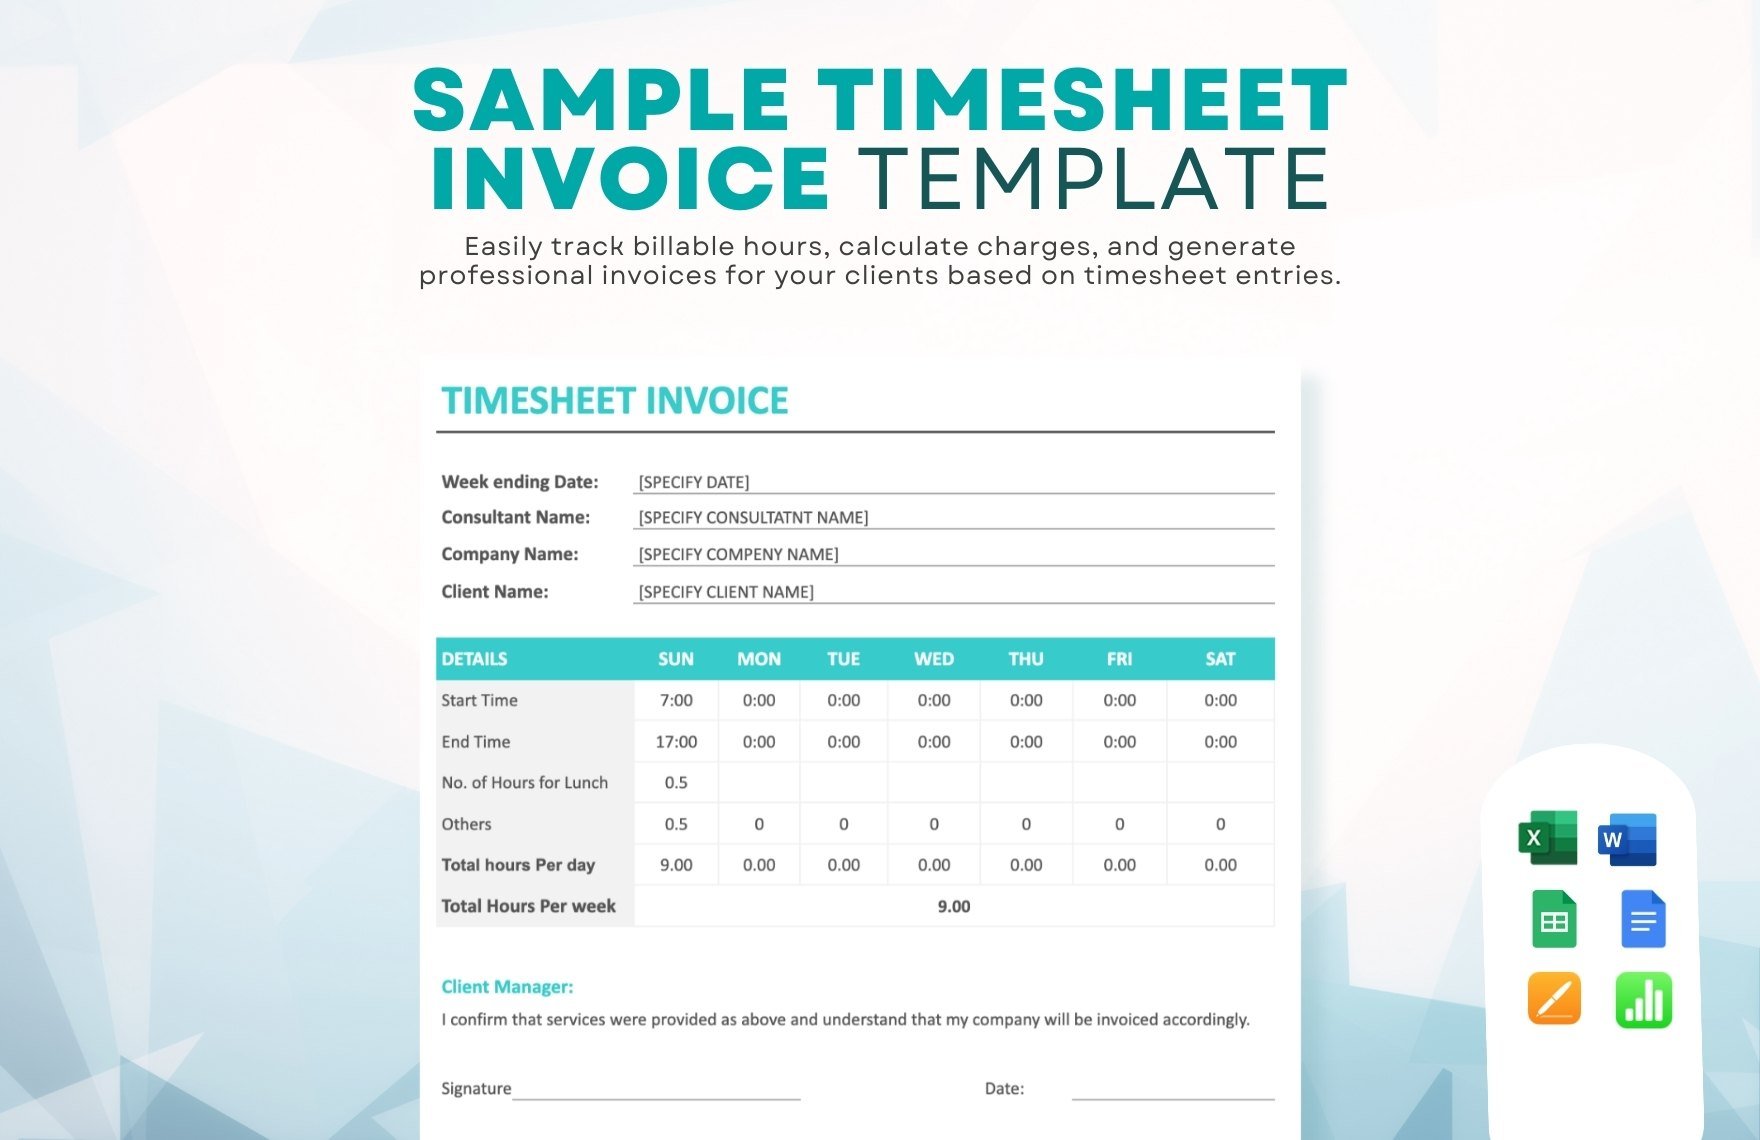 Free Sample Timesheet Invoice Template in Word, Google Docs, Excel, Google Sheets, Apple Pages, Apple Numbers